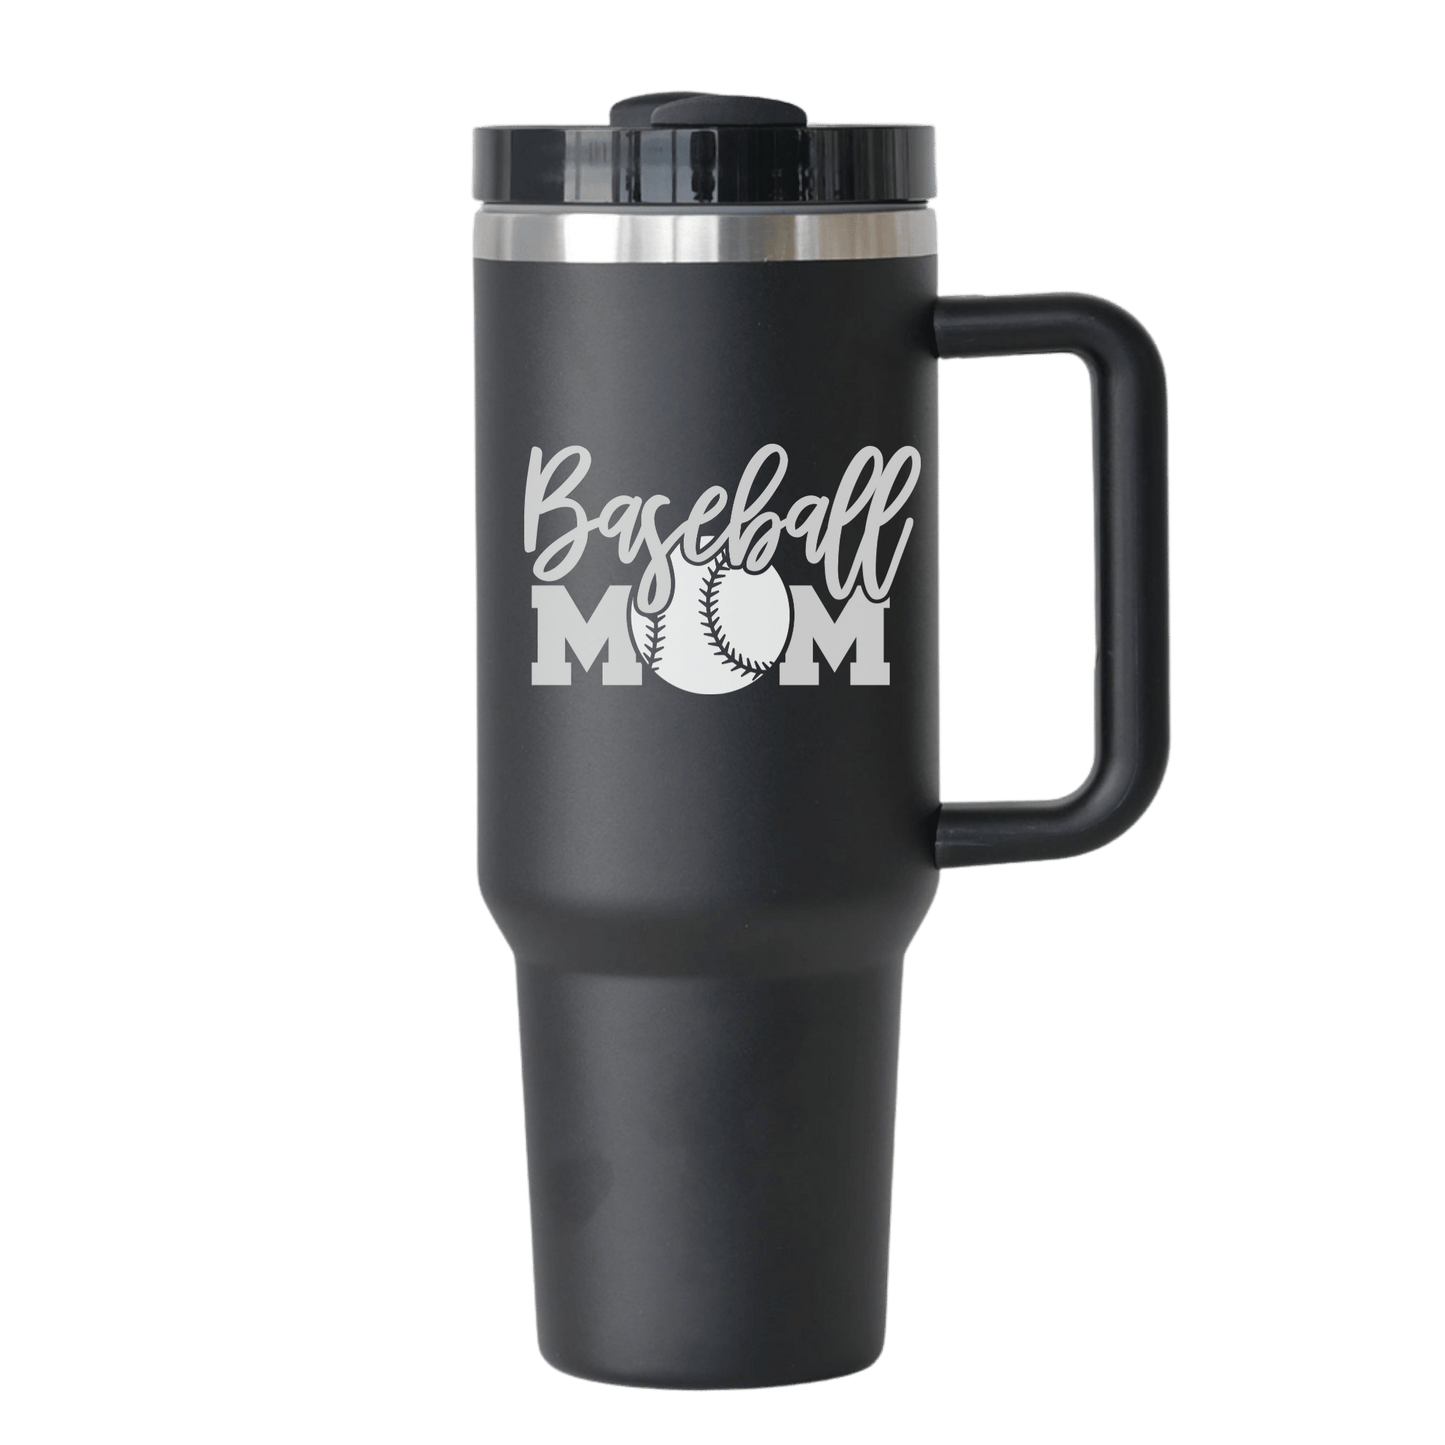 Baseball Mom Tumbler 40 oz. - with or without the number